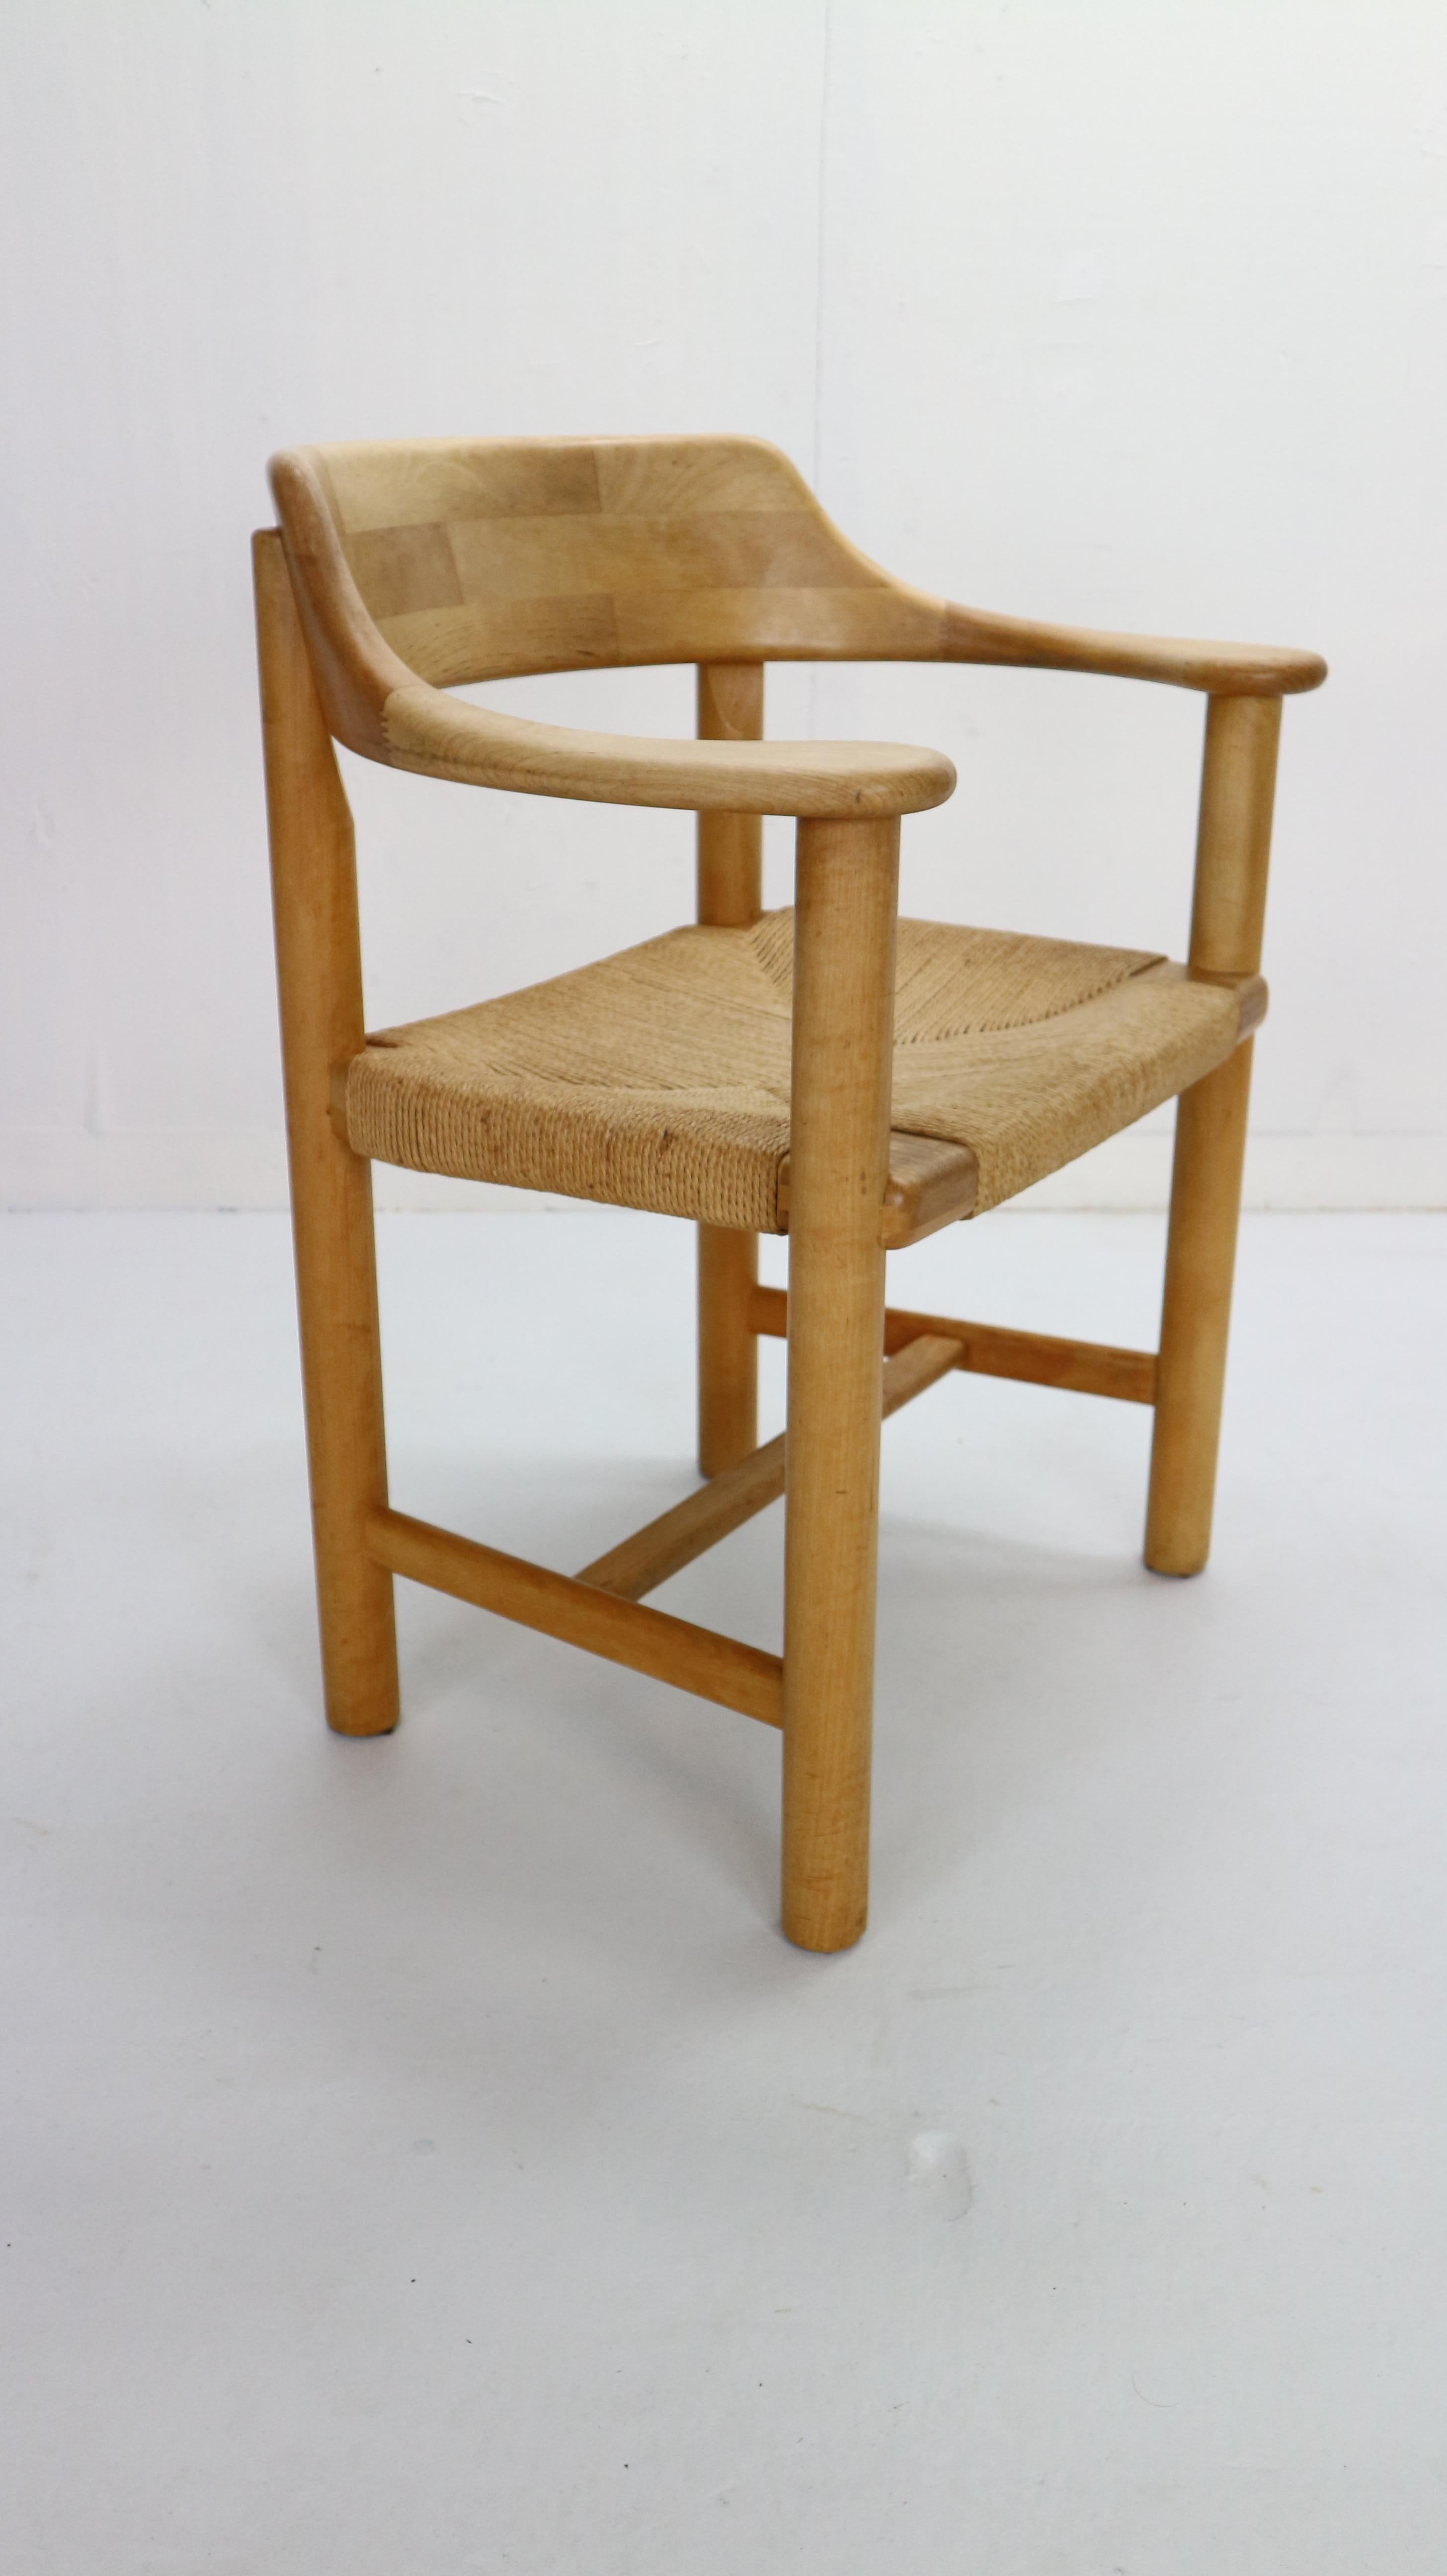 Pine Rainer Daumiller for Hirtshals Sawmill Set of 4 Dining Room Chairs, Denmark 1970